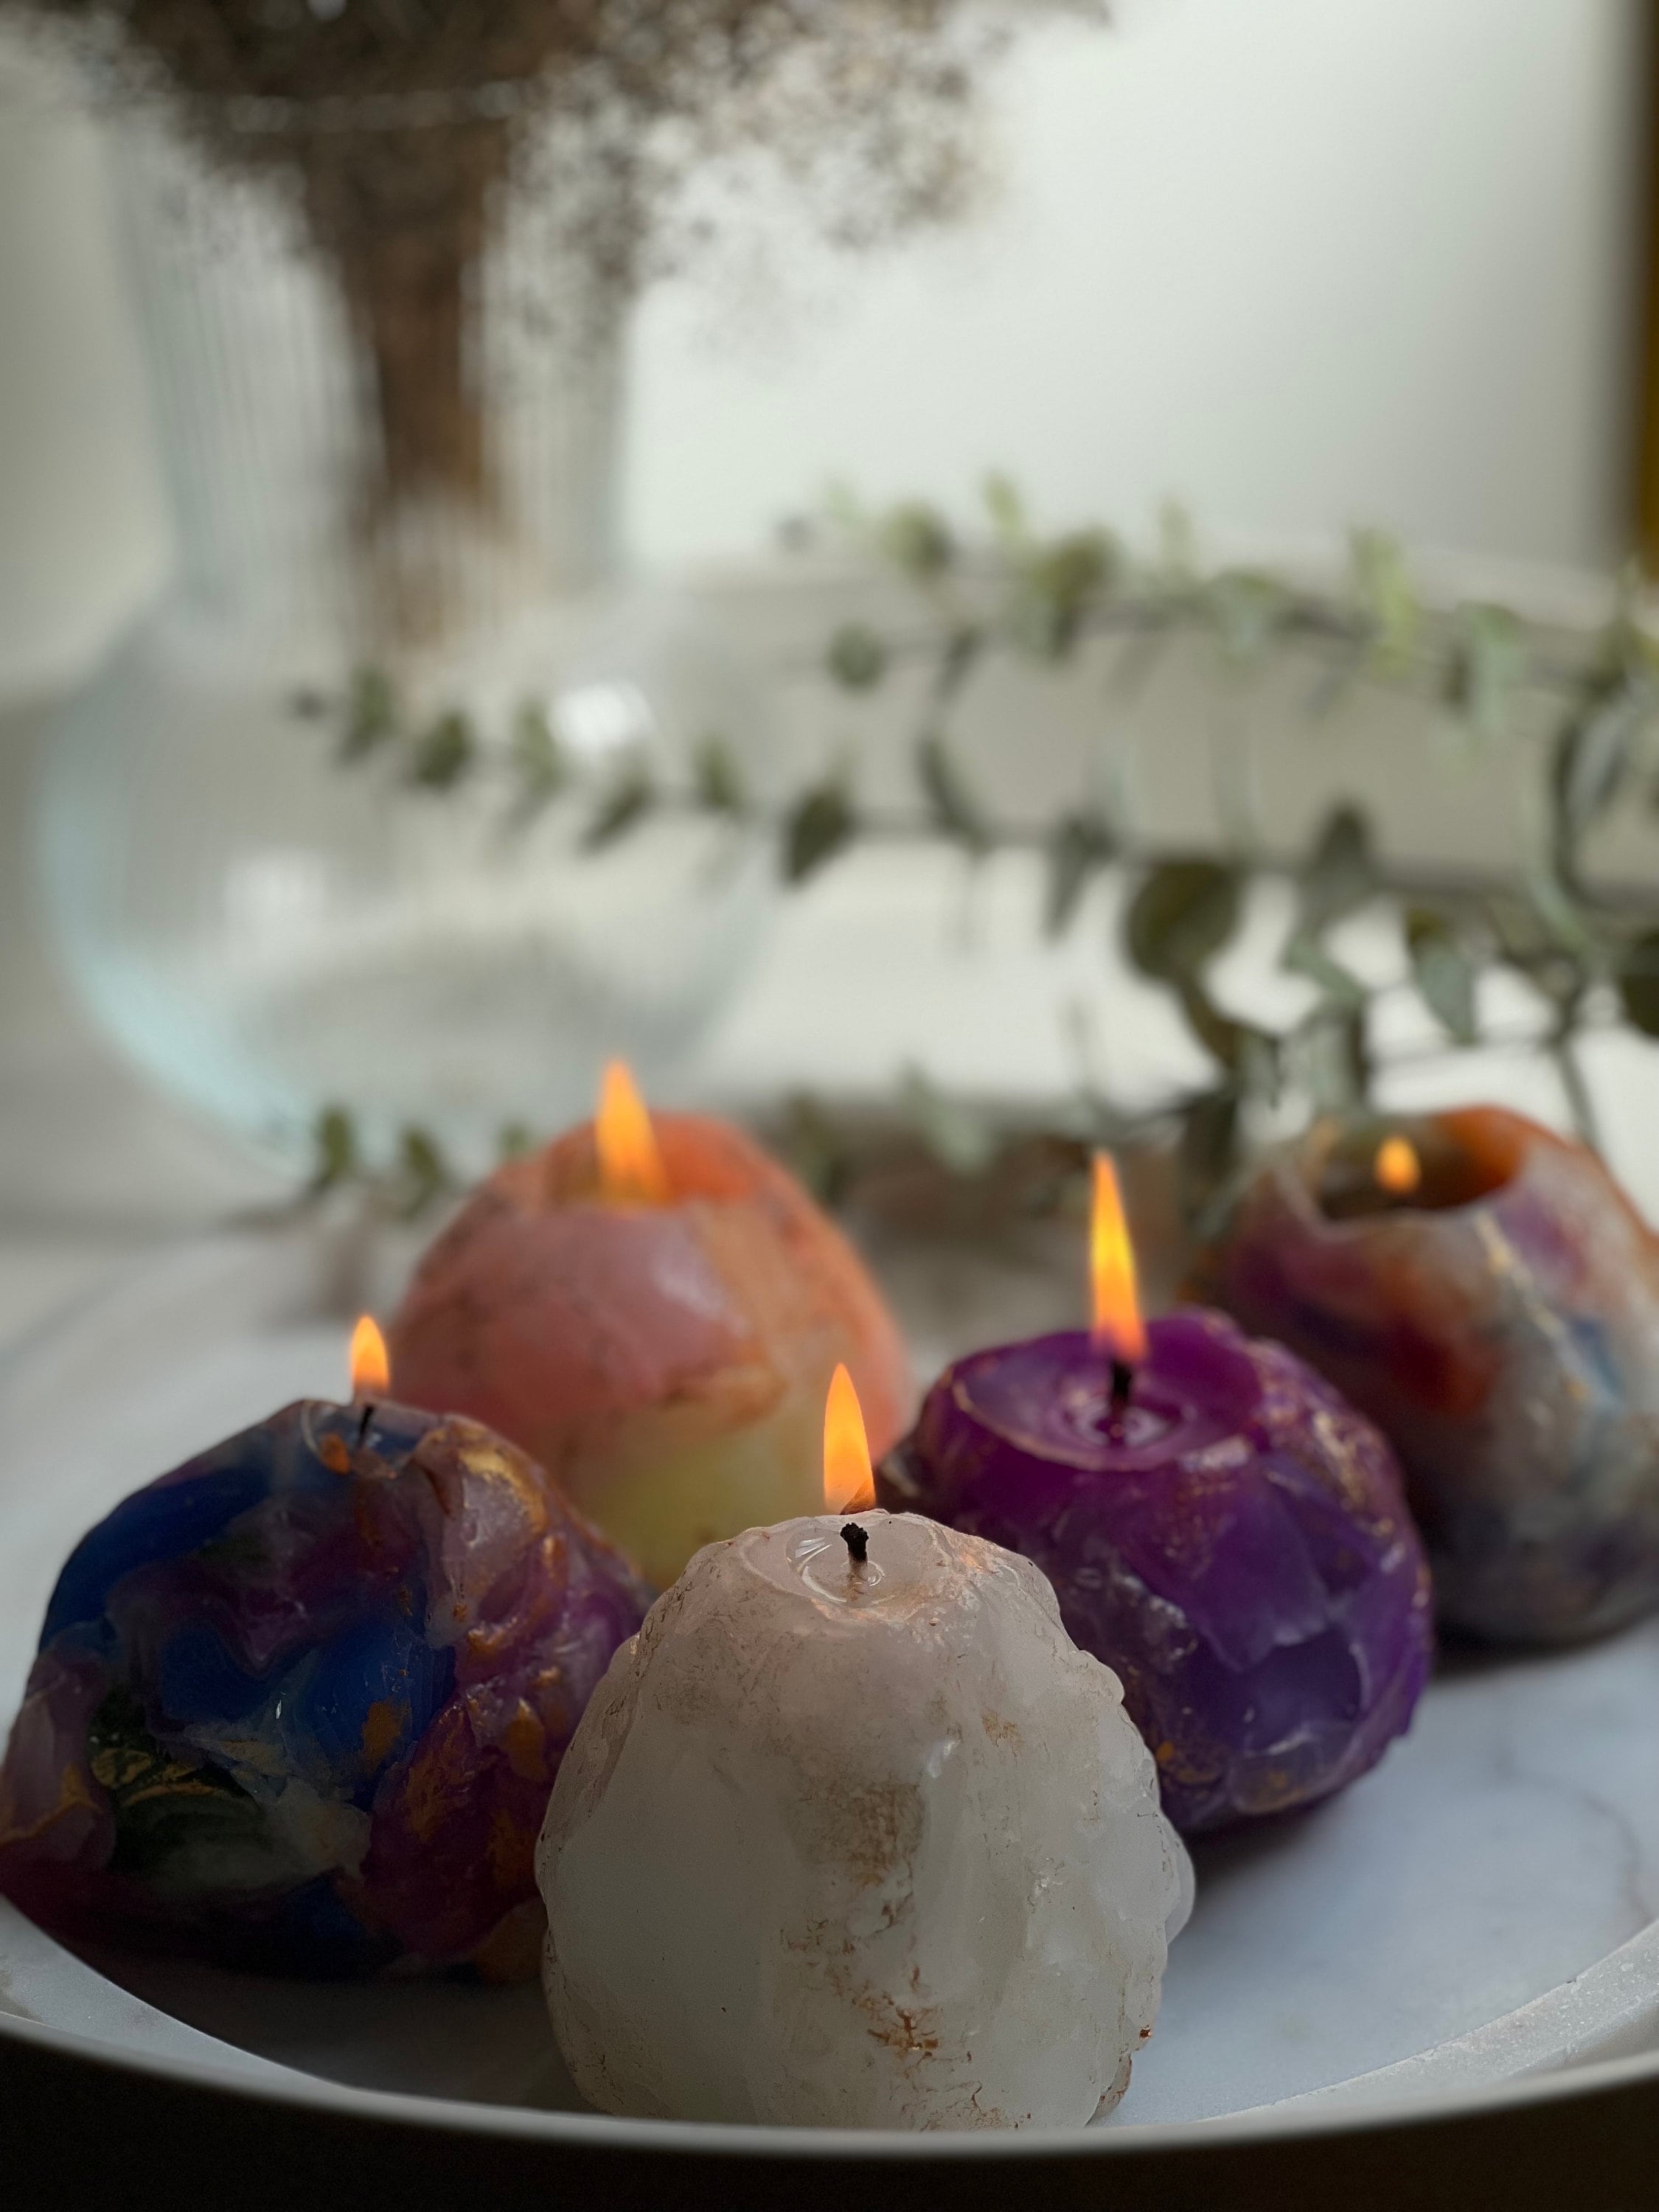 Candle Crystal, Shaped Candle, Burning Gem Candles, Artistic Candles,  Mindfulness Candle, Meditation Gift, Inspired by Magic Crystals 